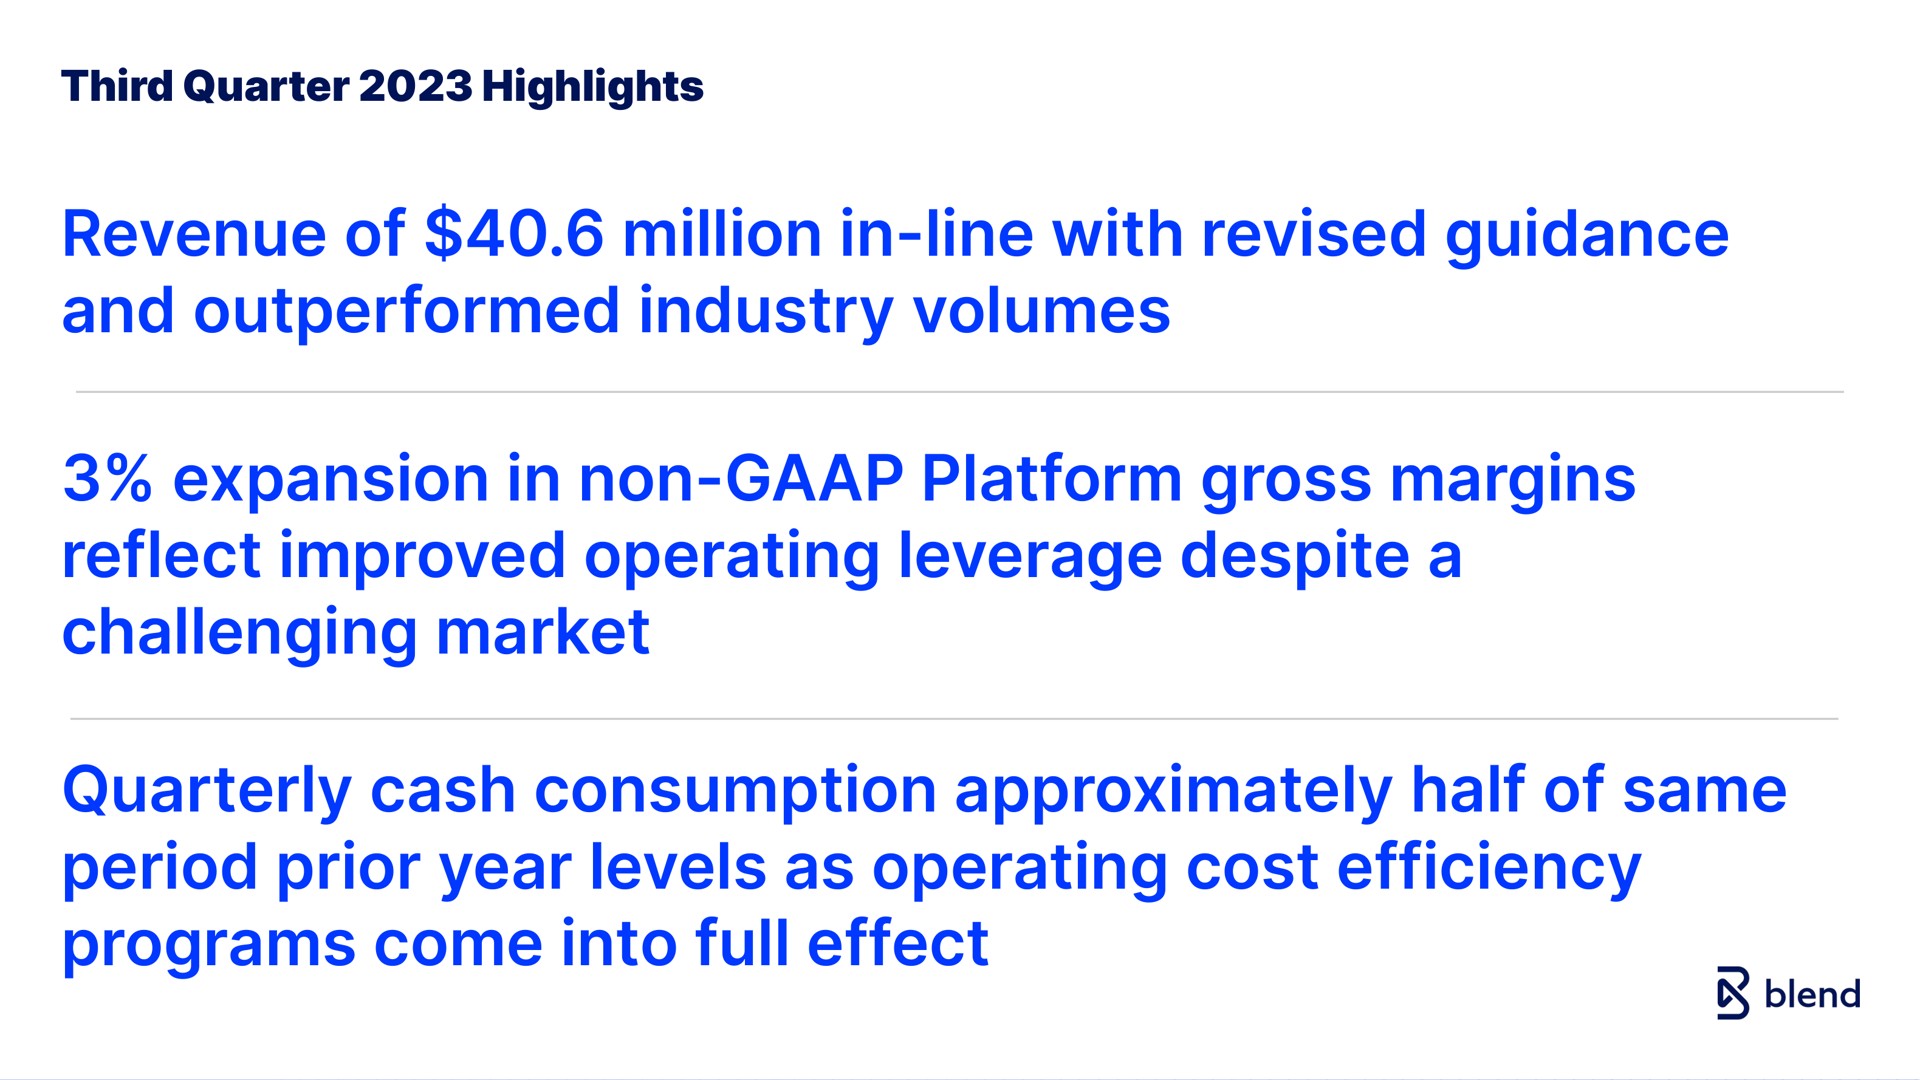 third quarter highlights revenue of million in line with revised guidance and outperformed industry volumes expansion in non platform gross margins reflect improved operating leverage despite a challenging market quarterly cash consumption approximately half of same period prior year levels as operating cost efficiency programs come into full effect blend | Blend